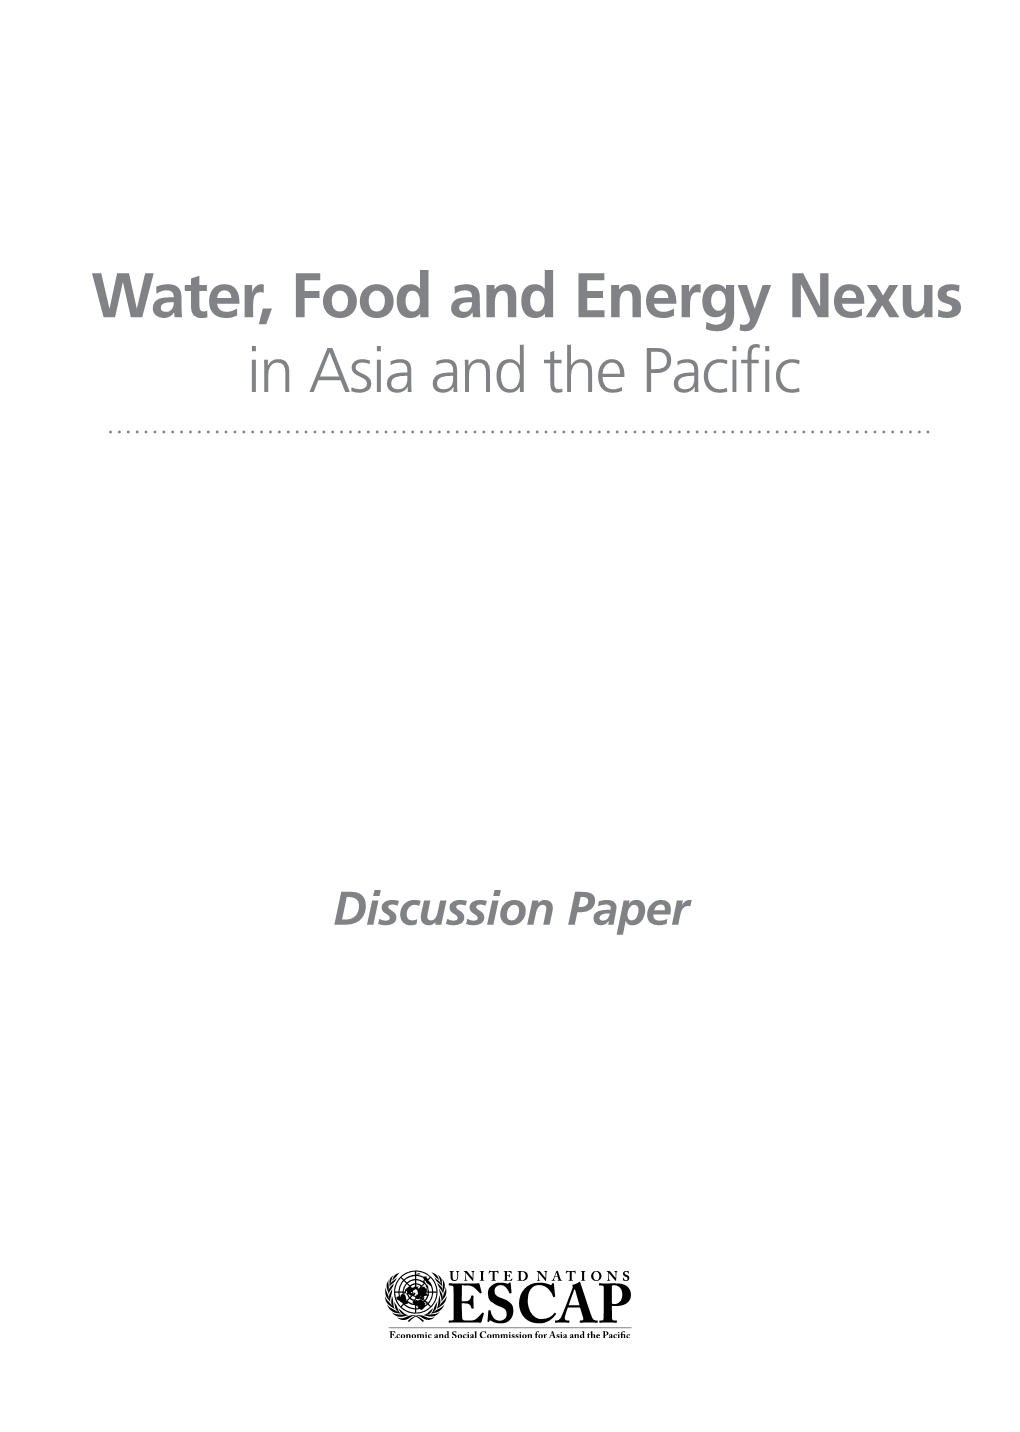 Water, Food and Energy Nexus in Asia and the Pacific